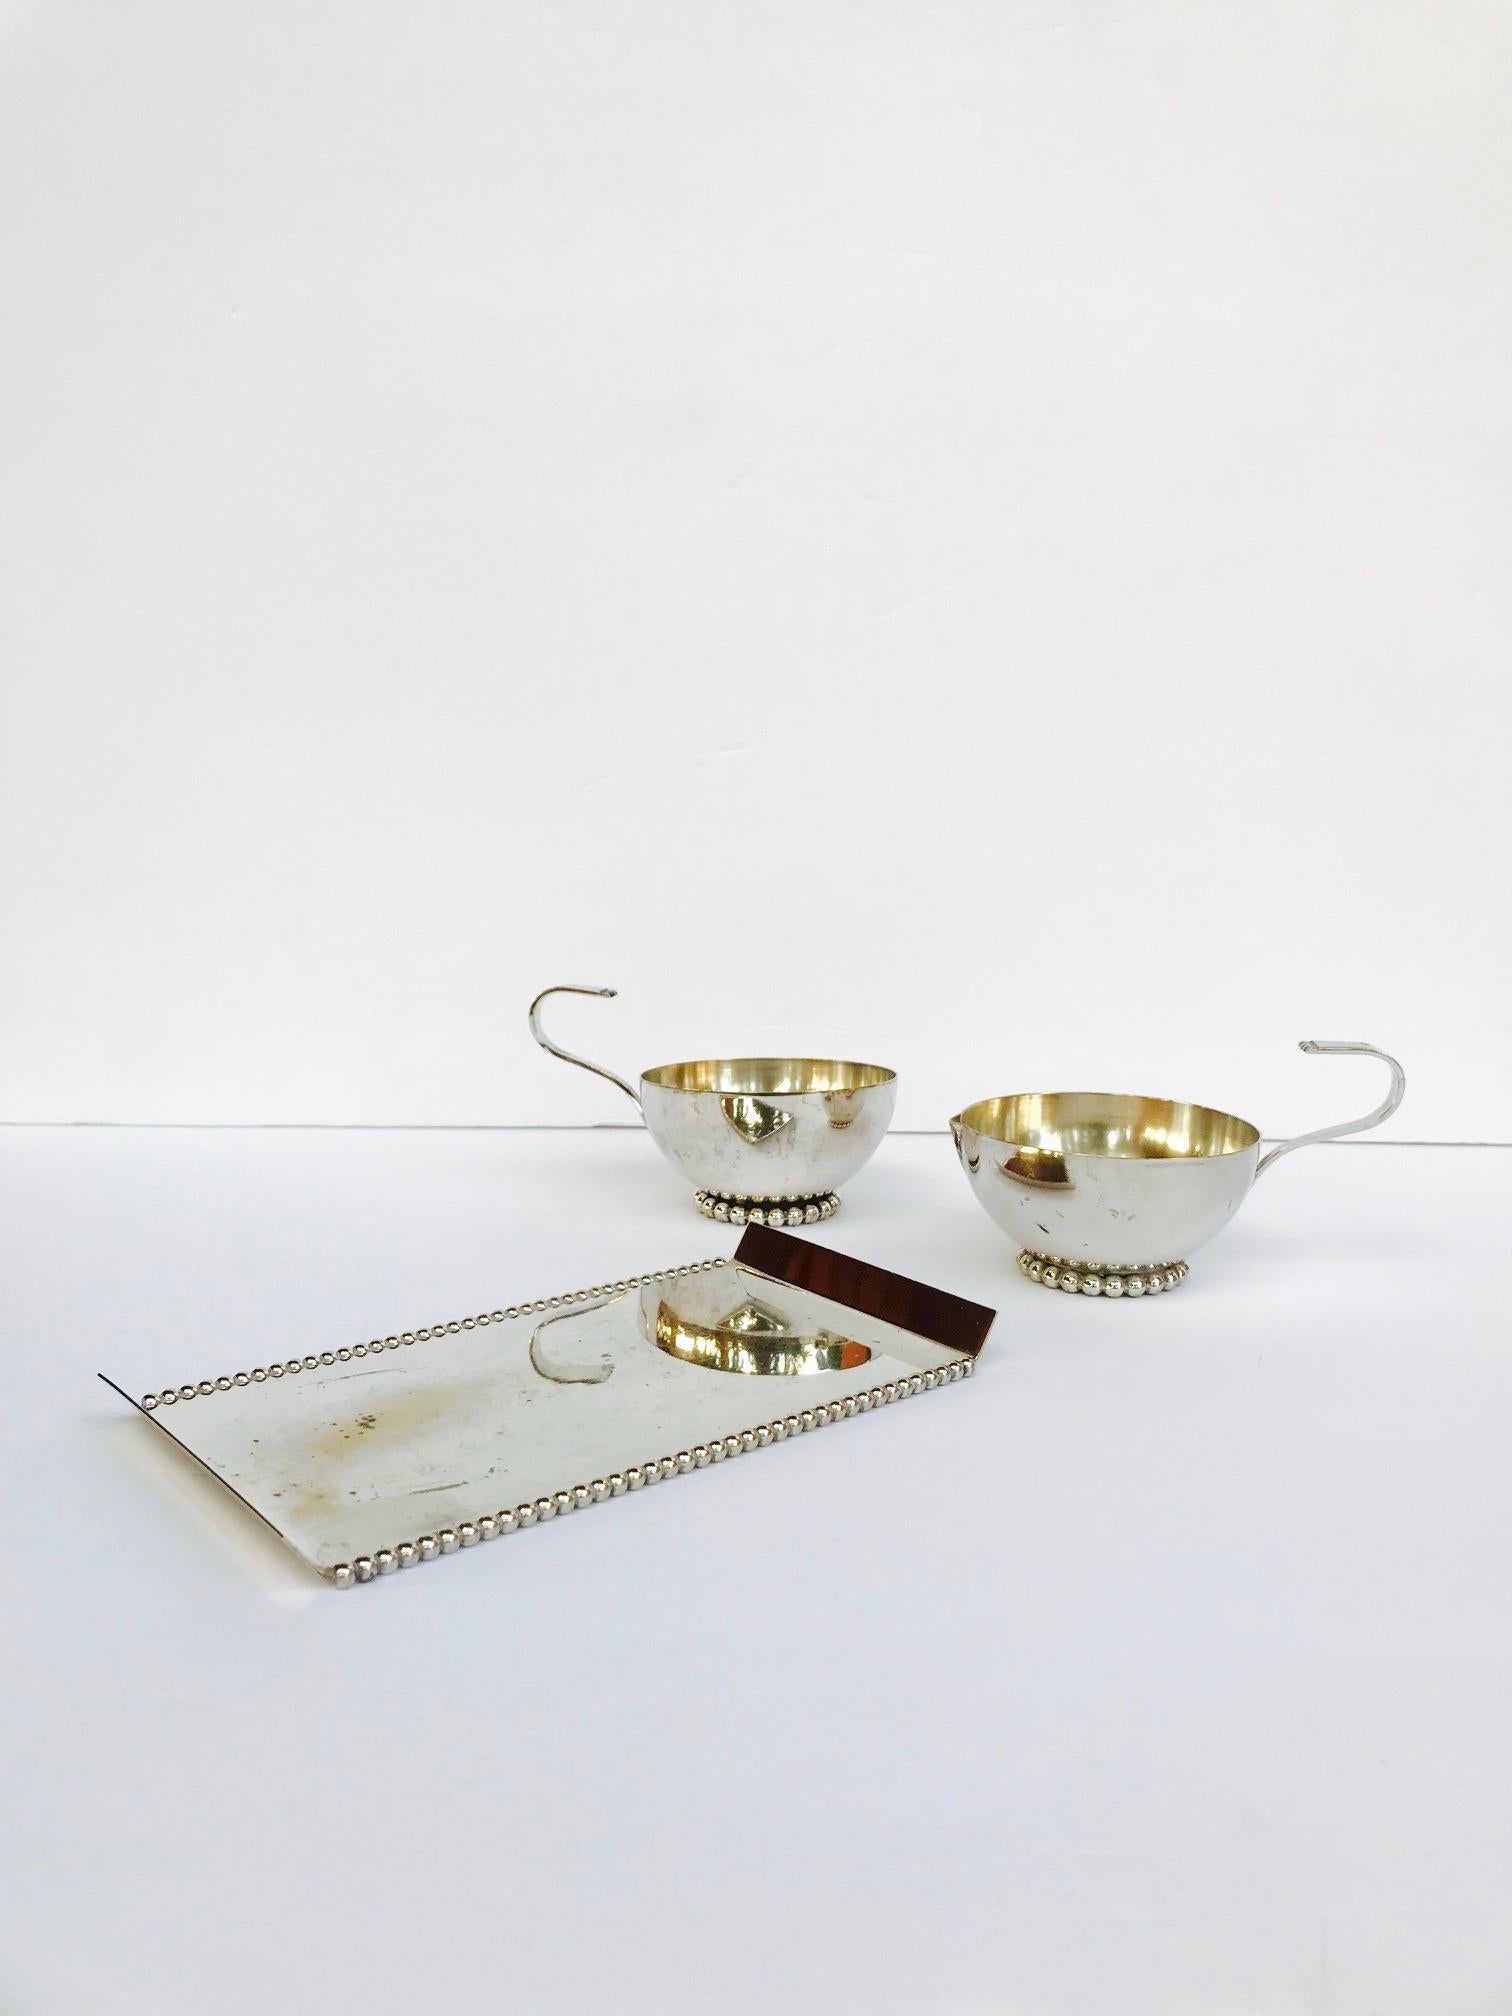 Late 20th Century Vintage Silver Plated Sugar and Creamer Serving Set, Italy, C. 1970s For Sale